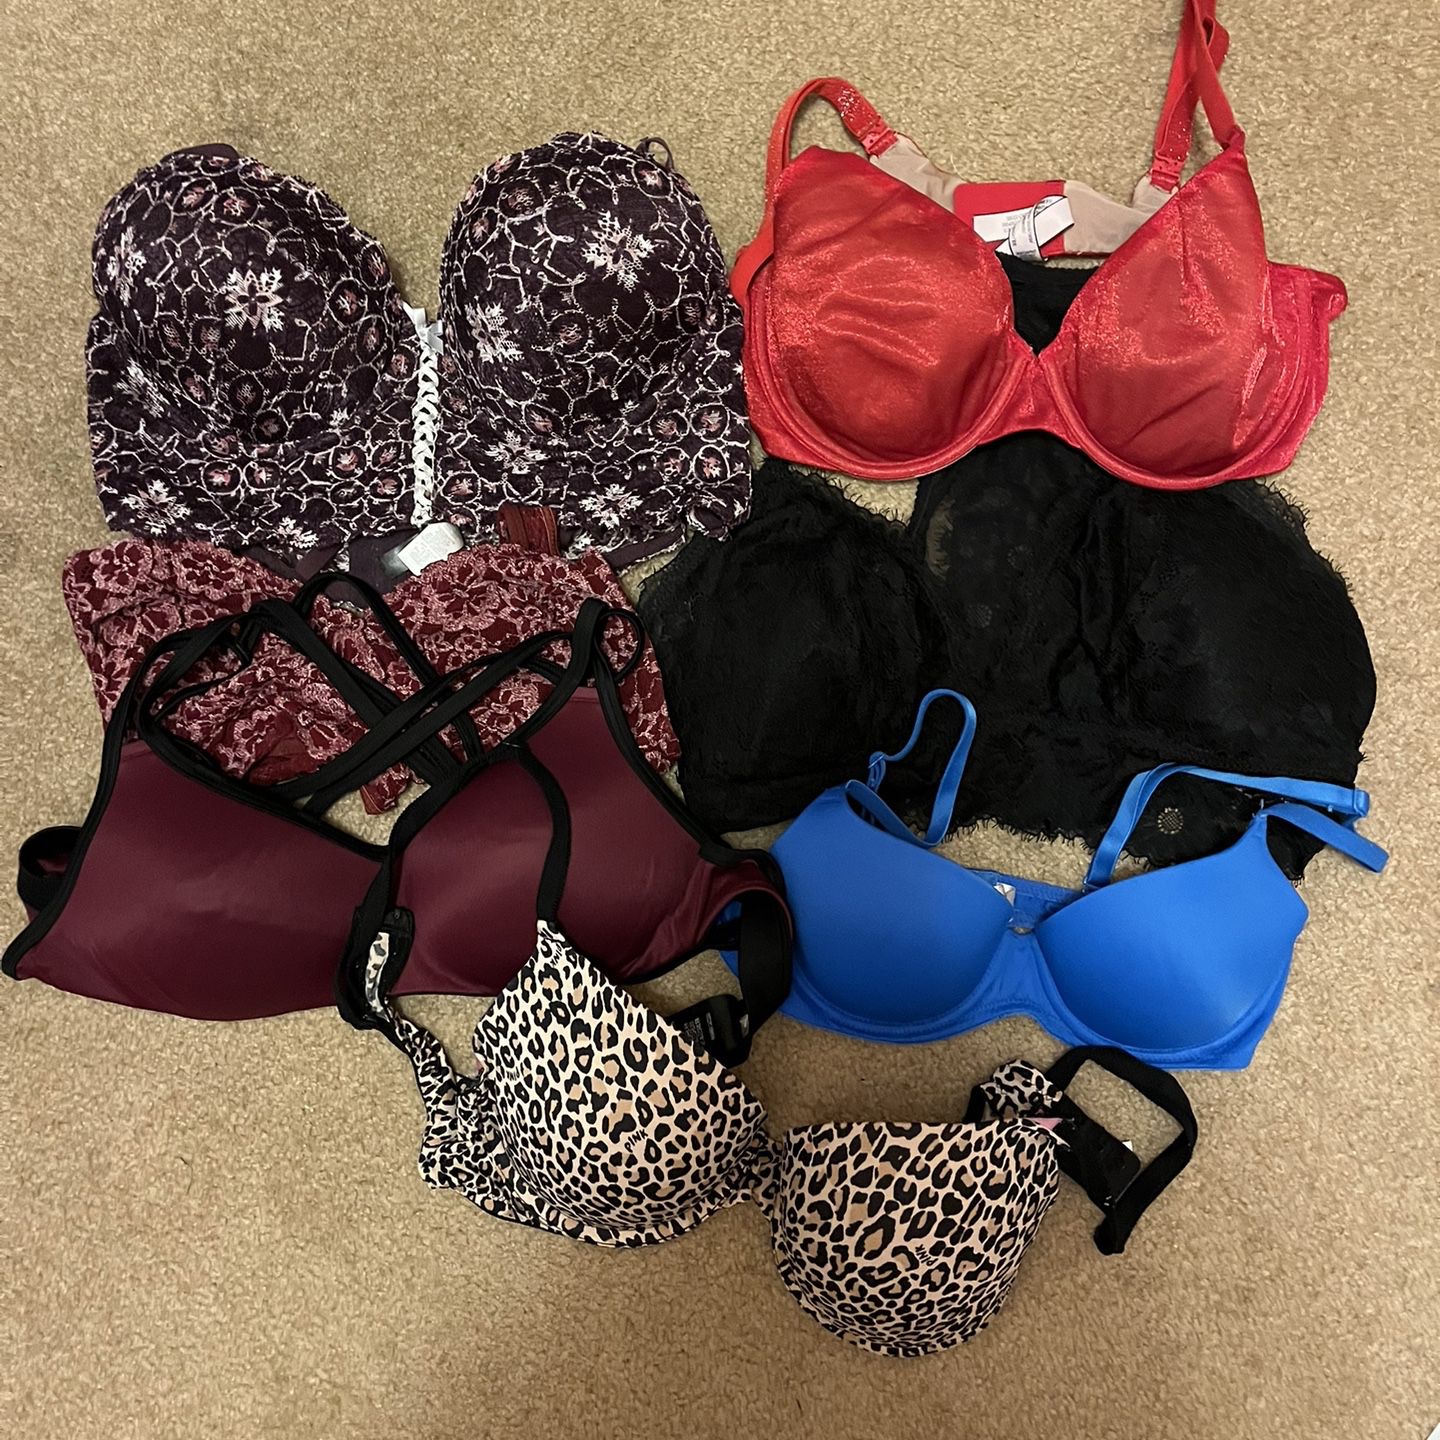 Victoria's secret Bras for Sale in Oley, PA - OfferUp